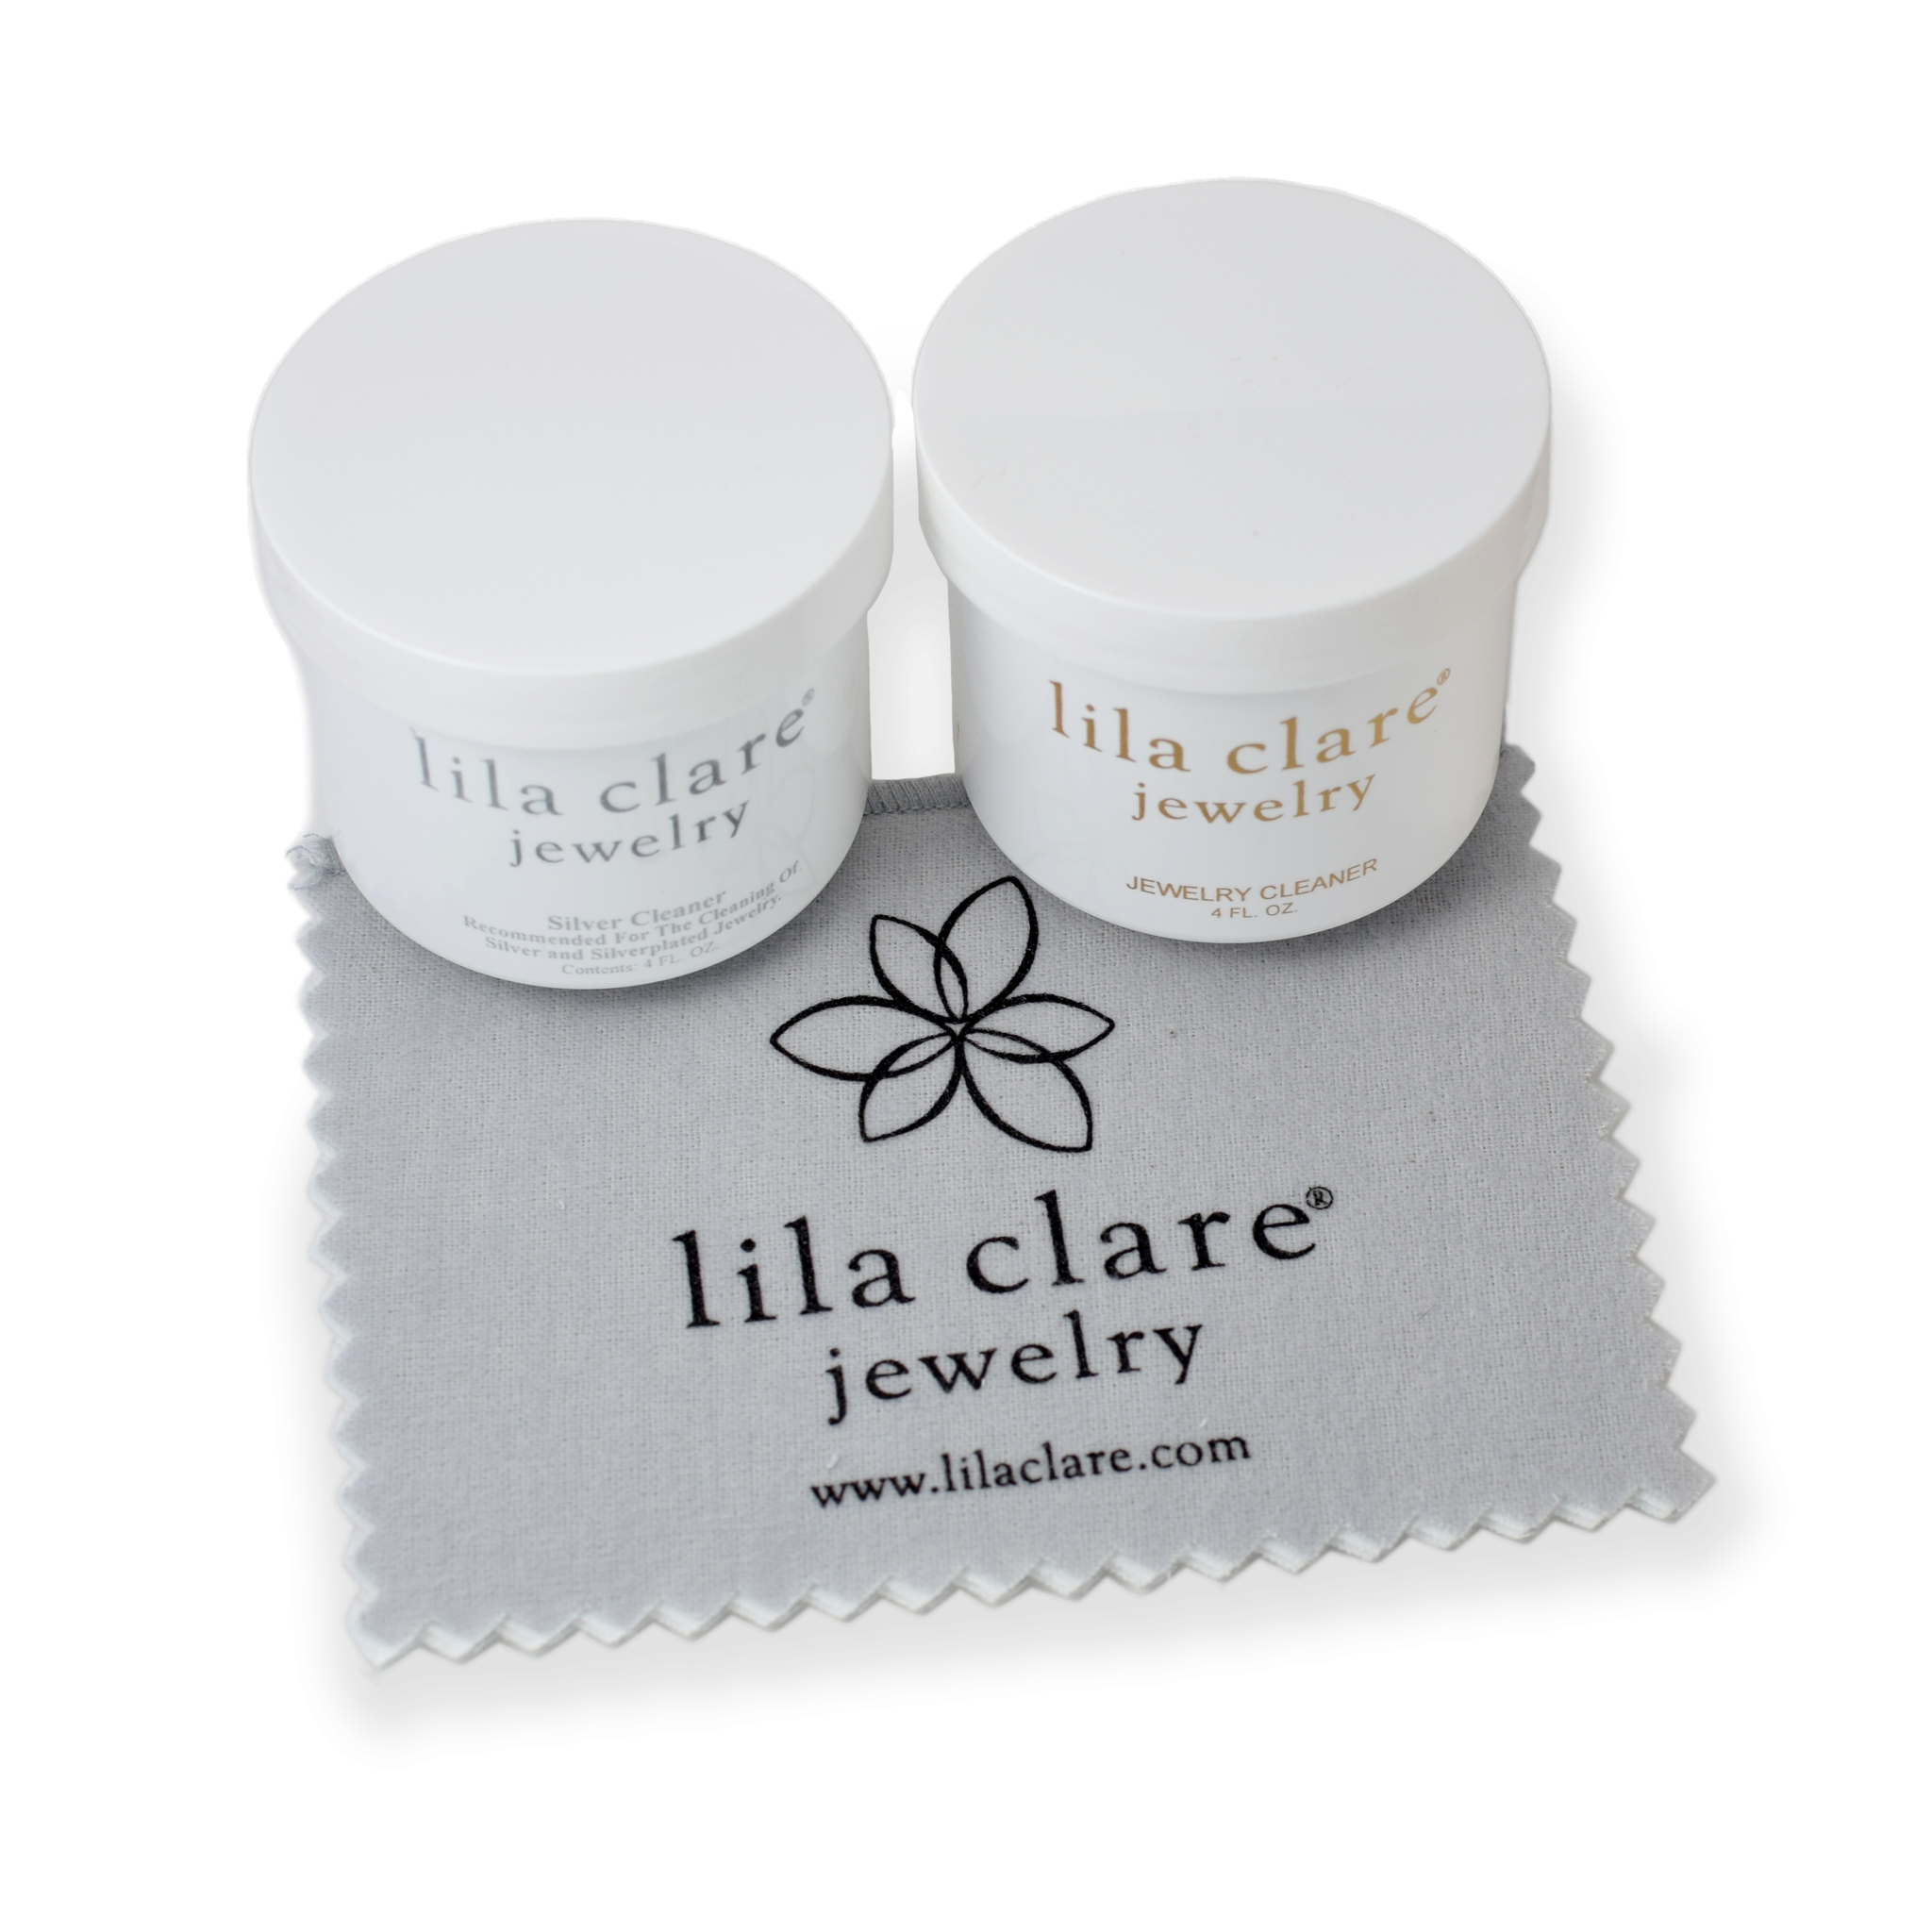 Jewelry Cleaning Kit - Lila Clare